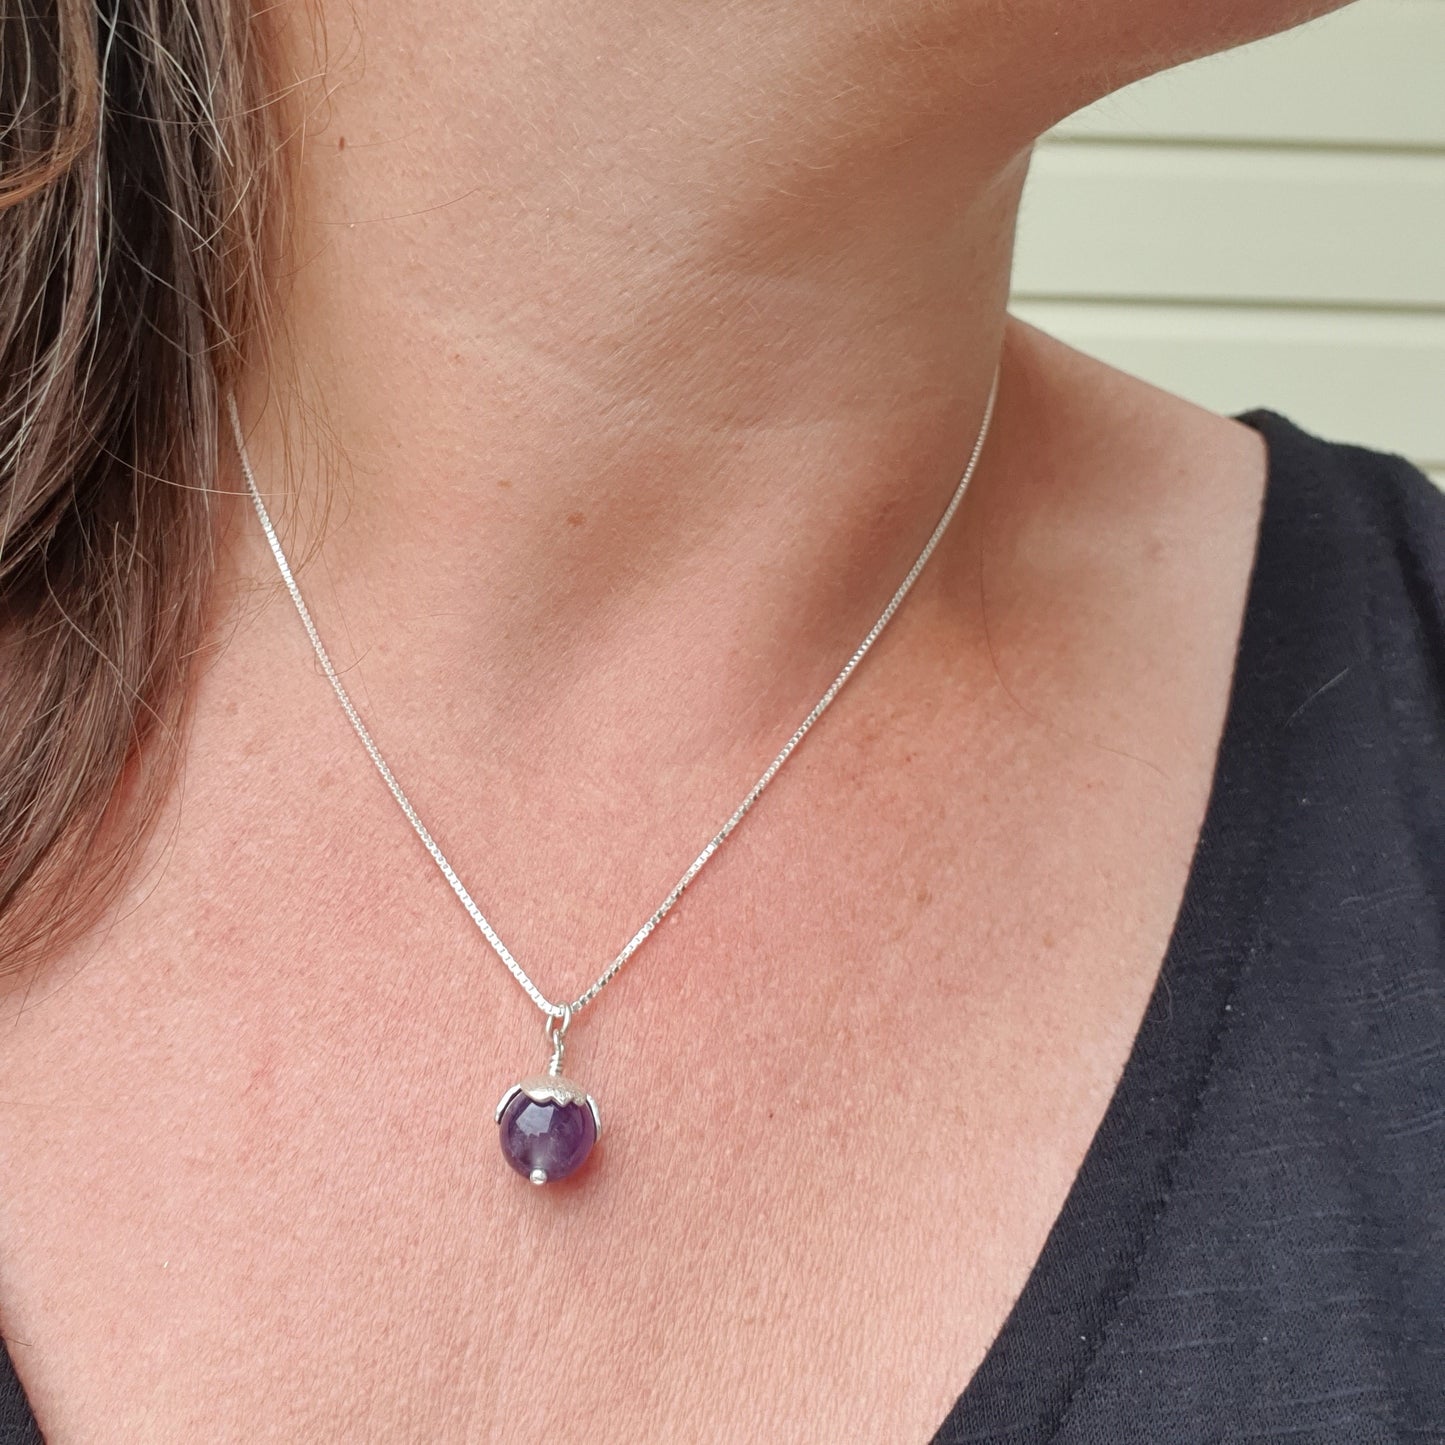 Amethyst Blossom Necklace